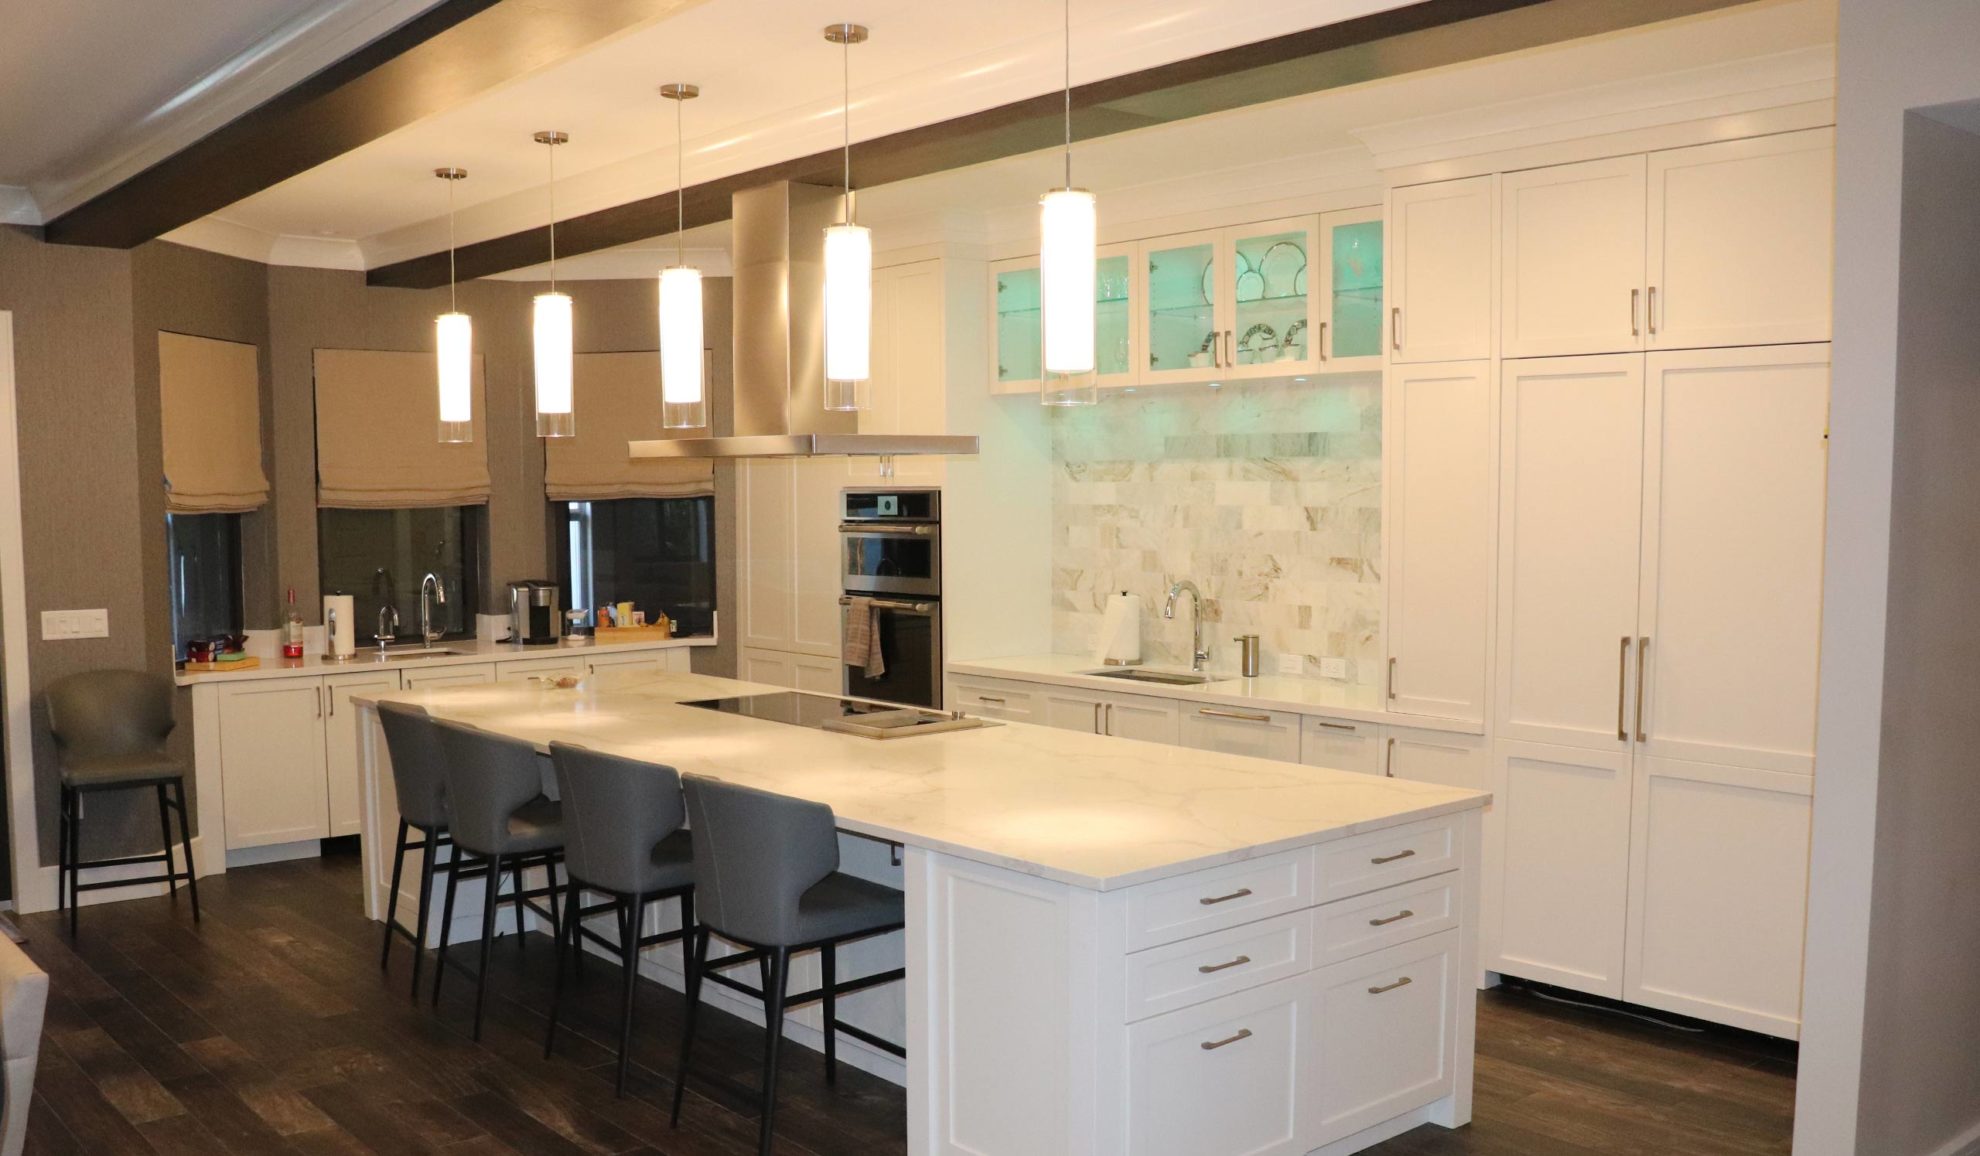 residential property kitchen interiors remodeled with new white cabinets and countertops palm beach fl